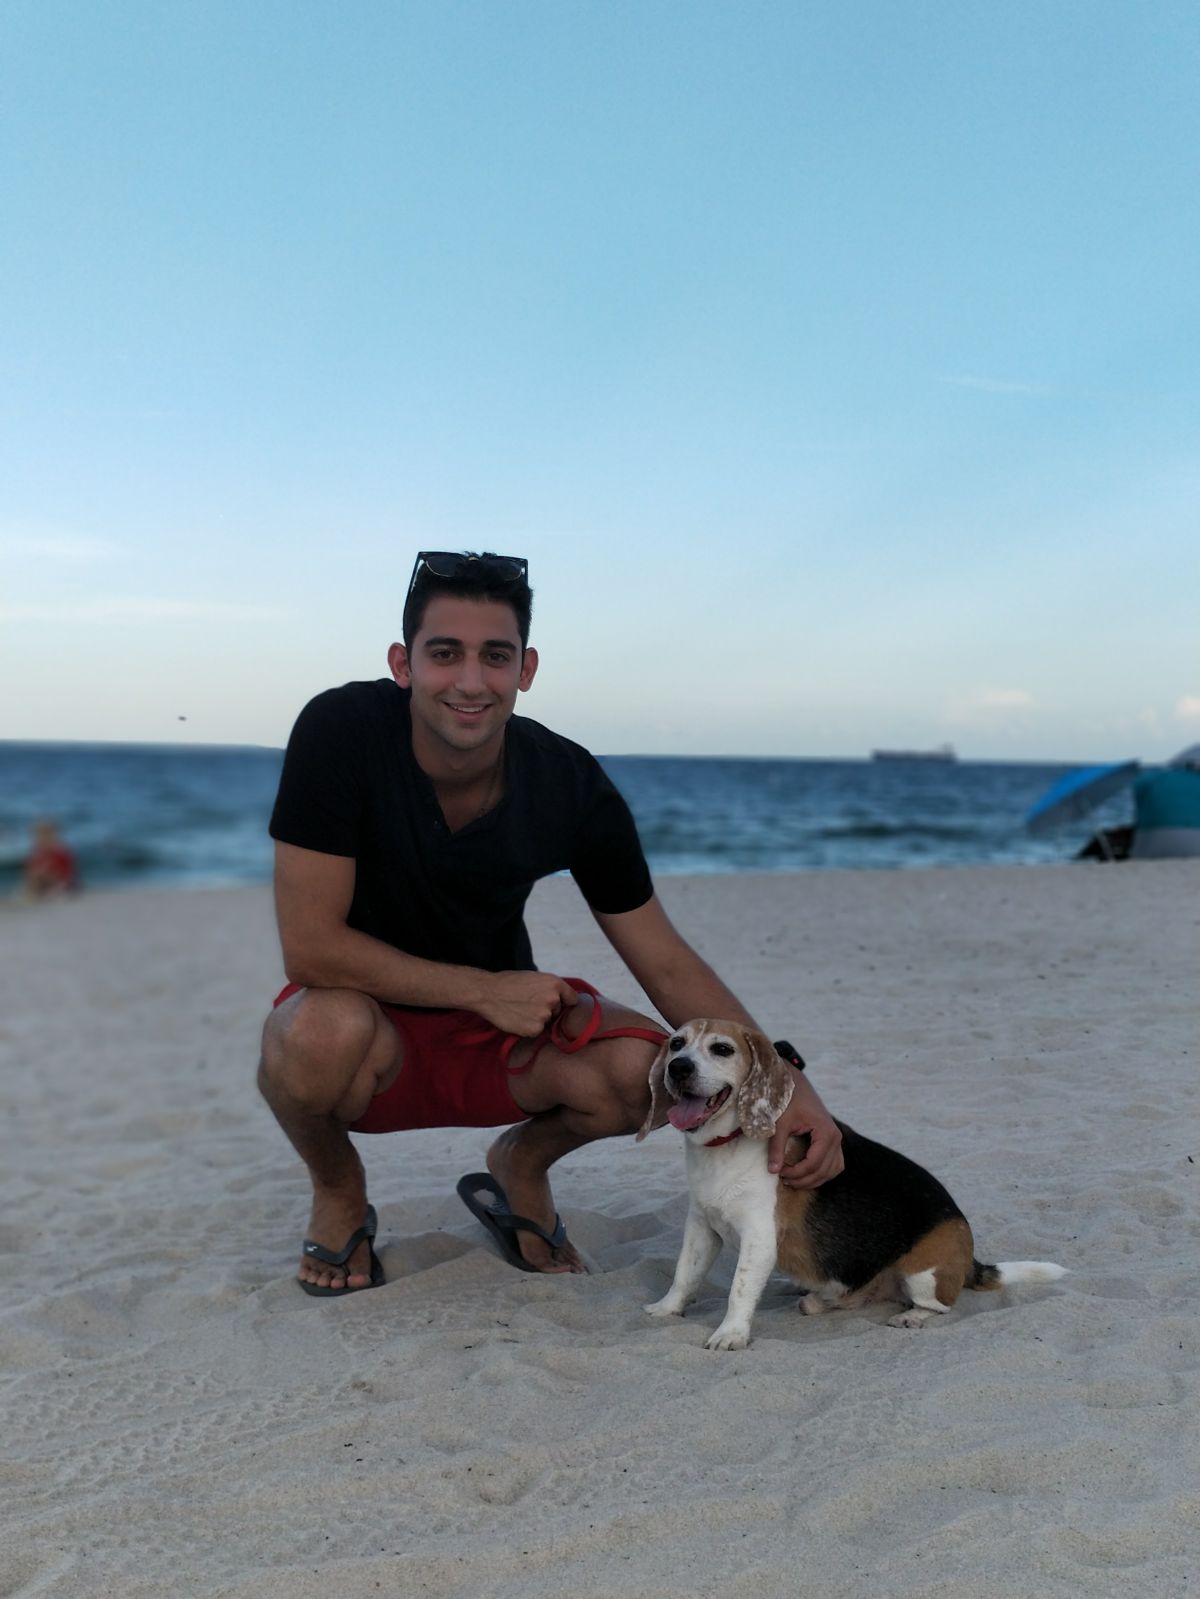 Arvin at the beach with his dog